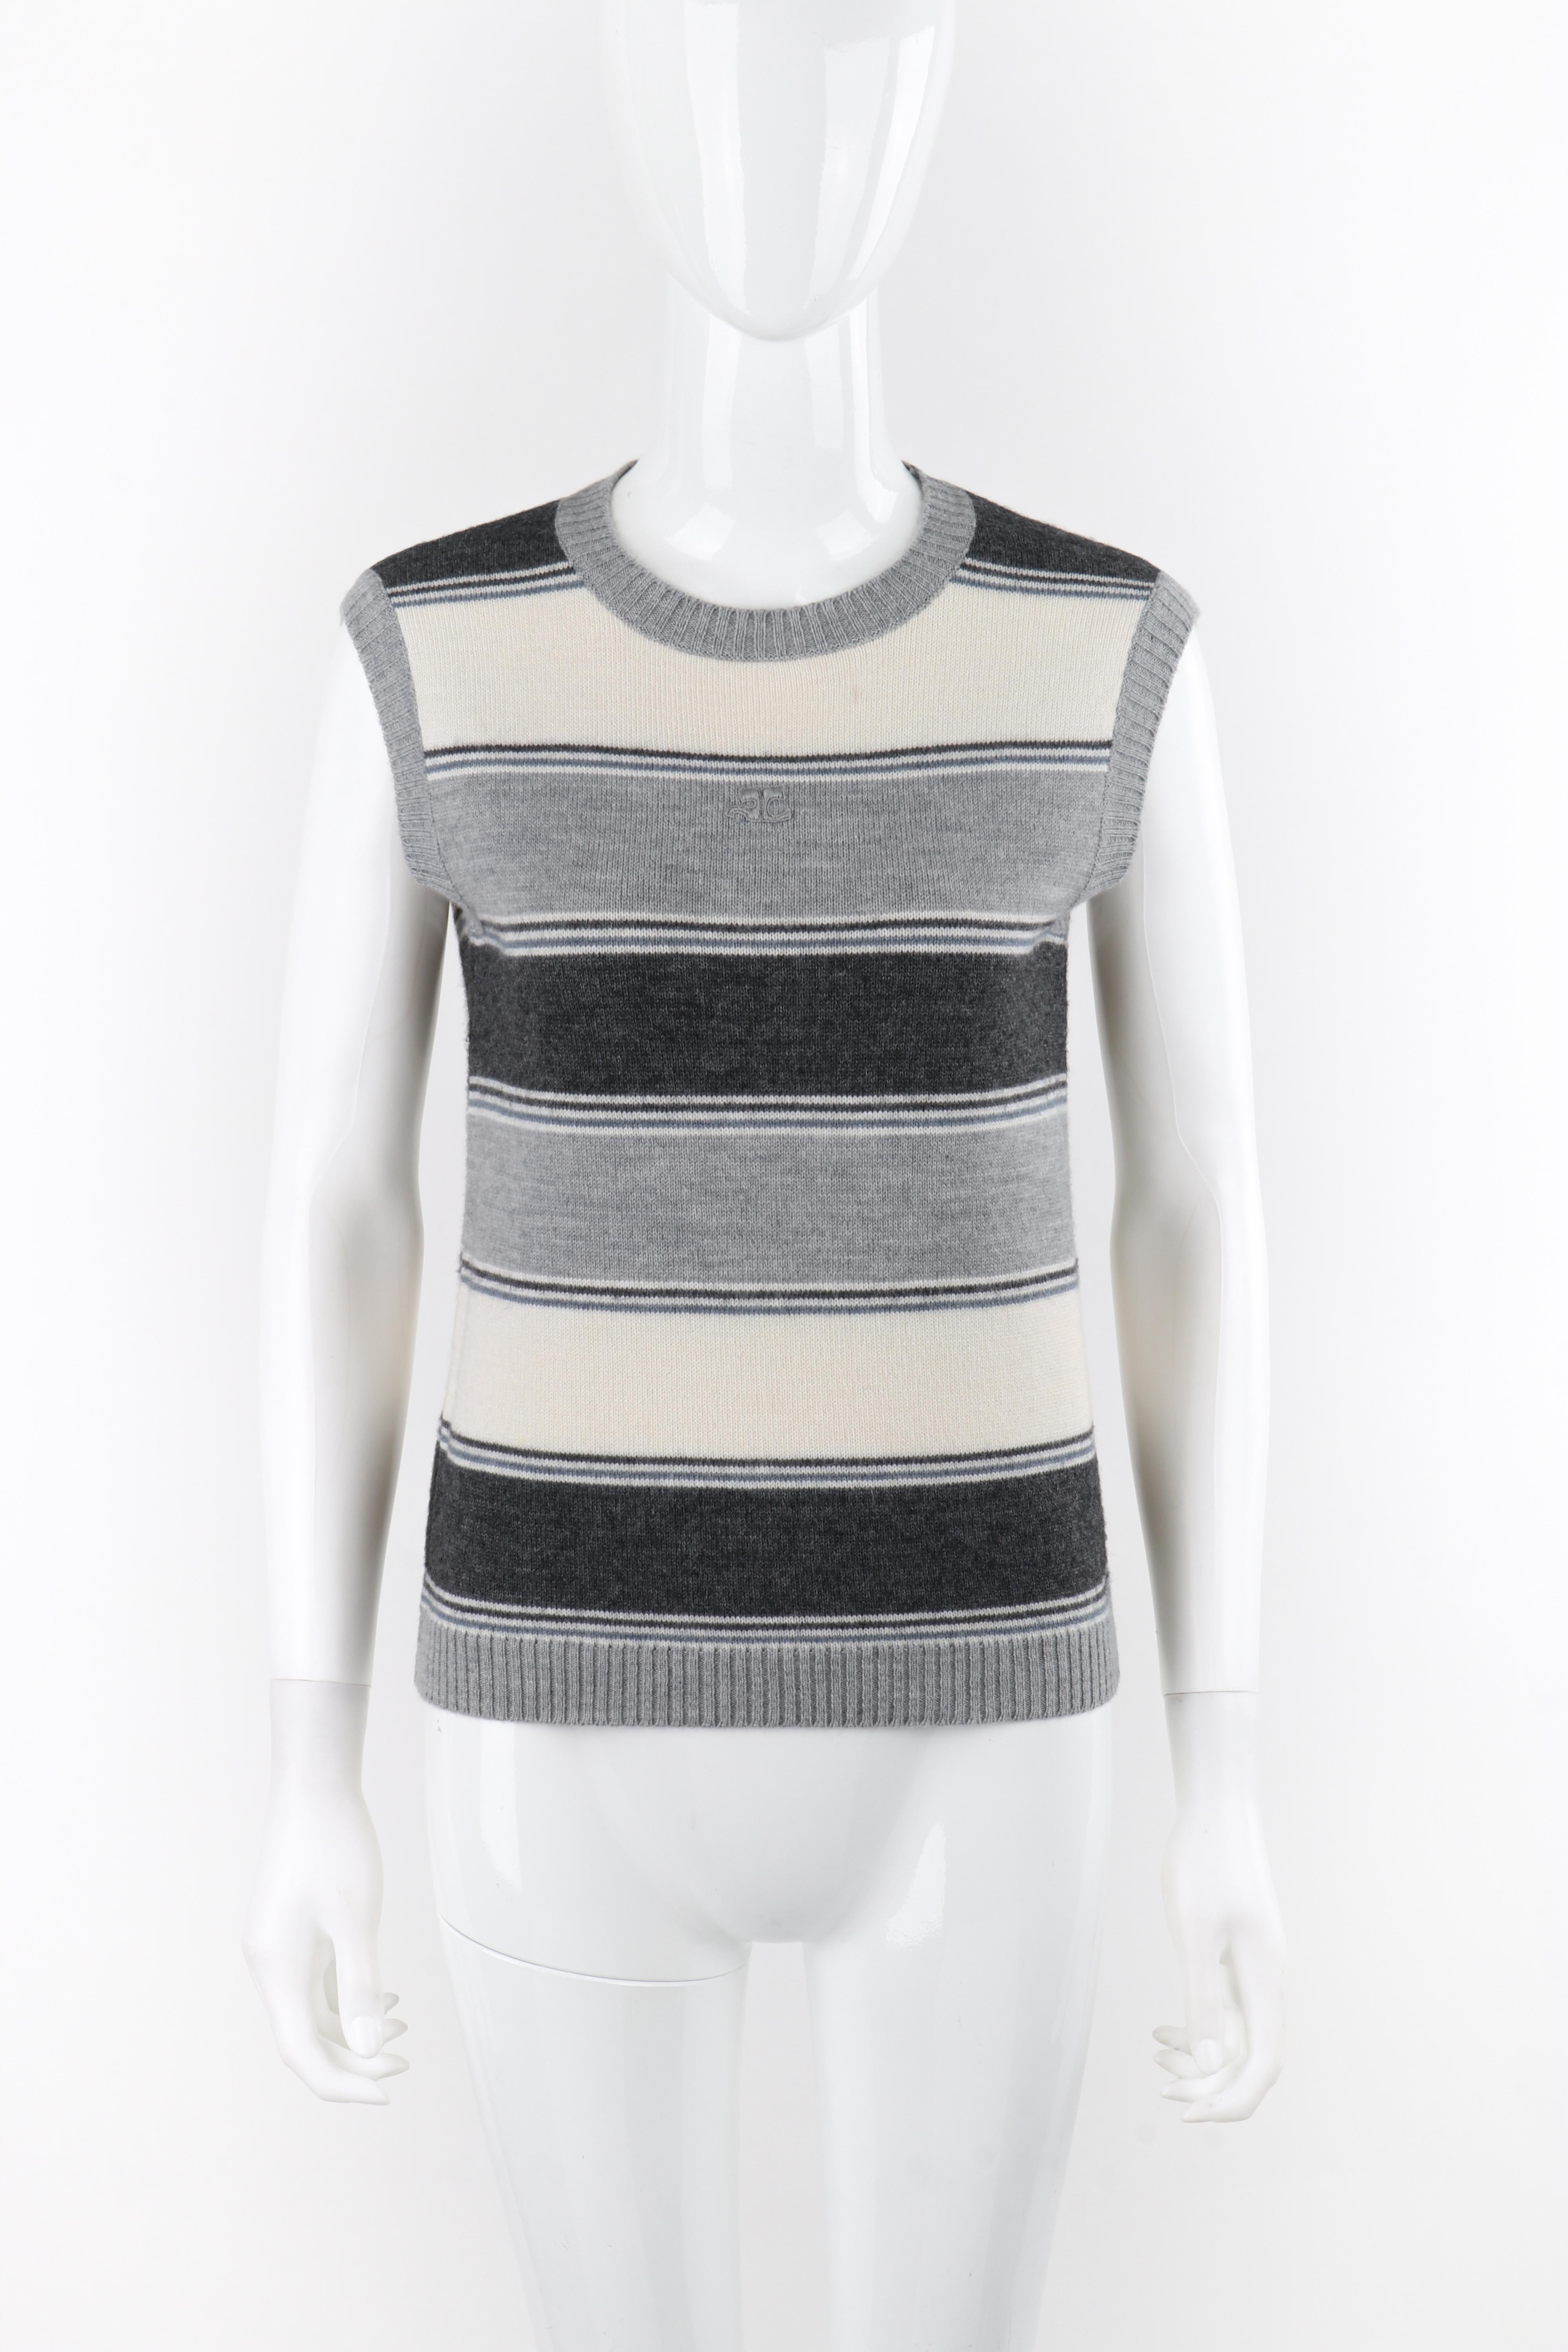 Brand / Manufacturer: Courreges
Circa: 1970s
Designer: Andre Courreges
Style: Sleeveless Sweater Top
Color(s): Shades of Gray, blue, white
Lined: No
Marked Fabric Content: 